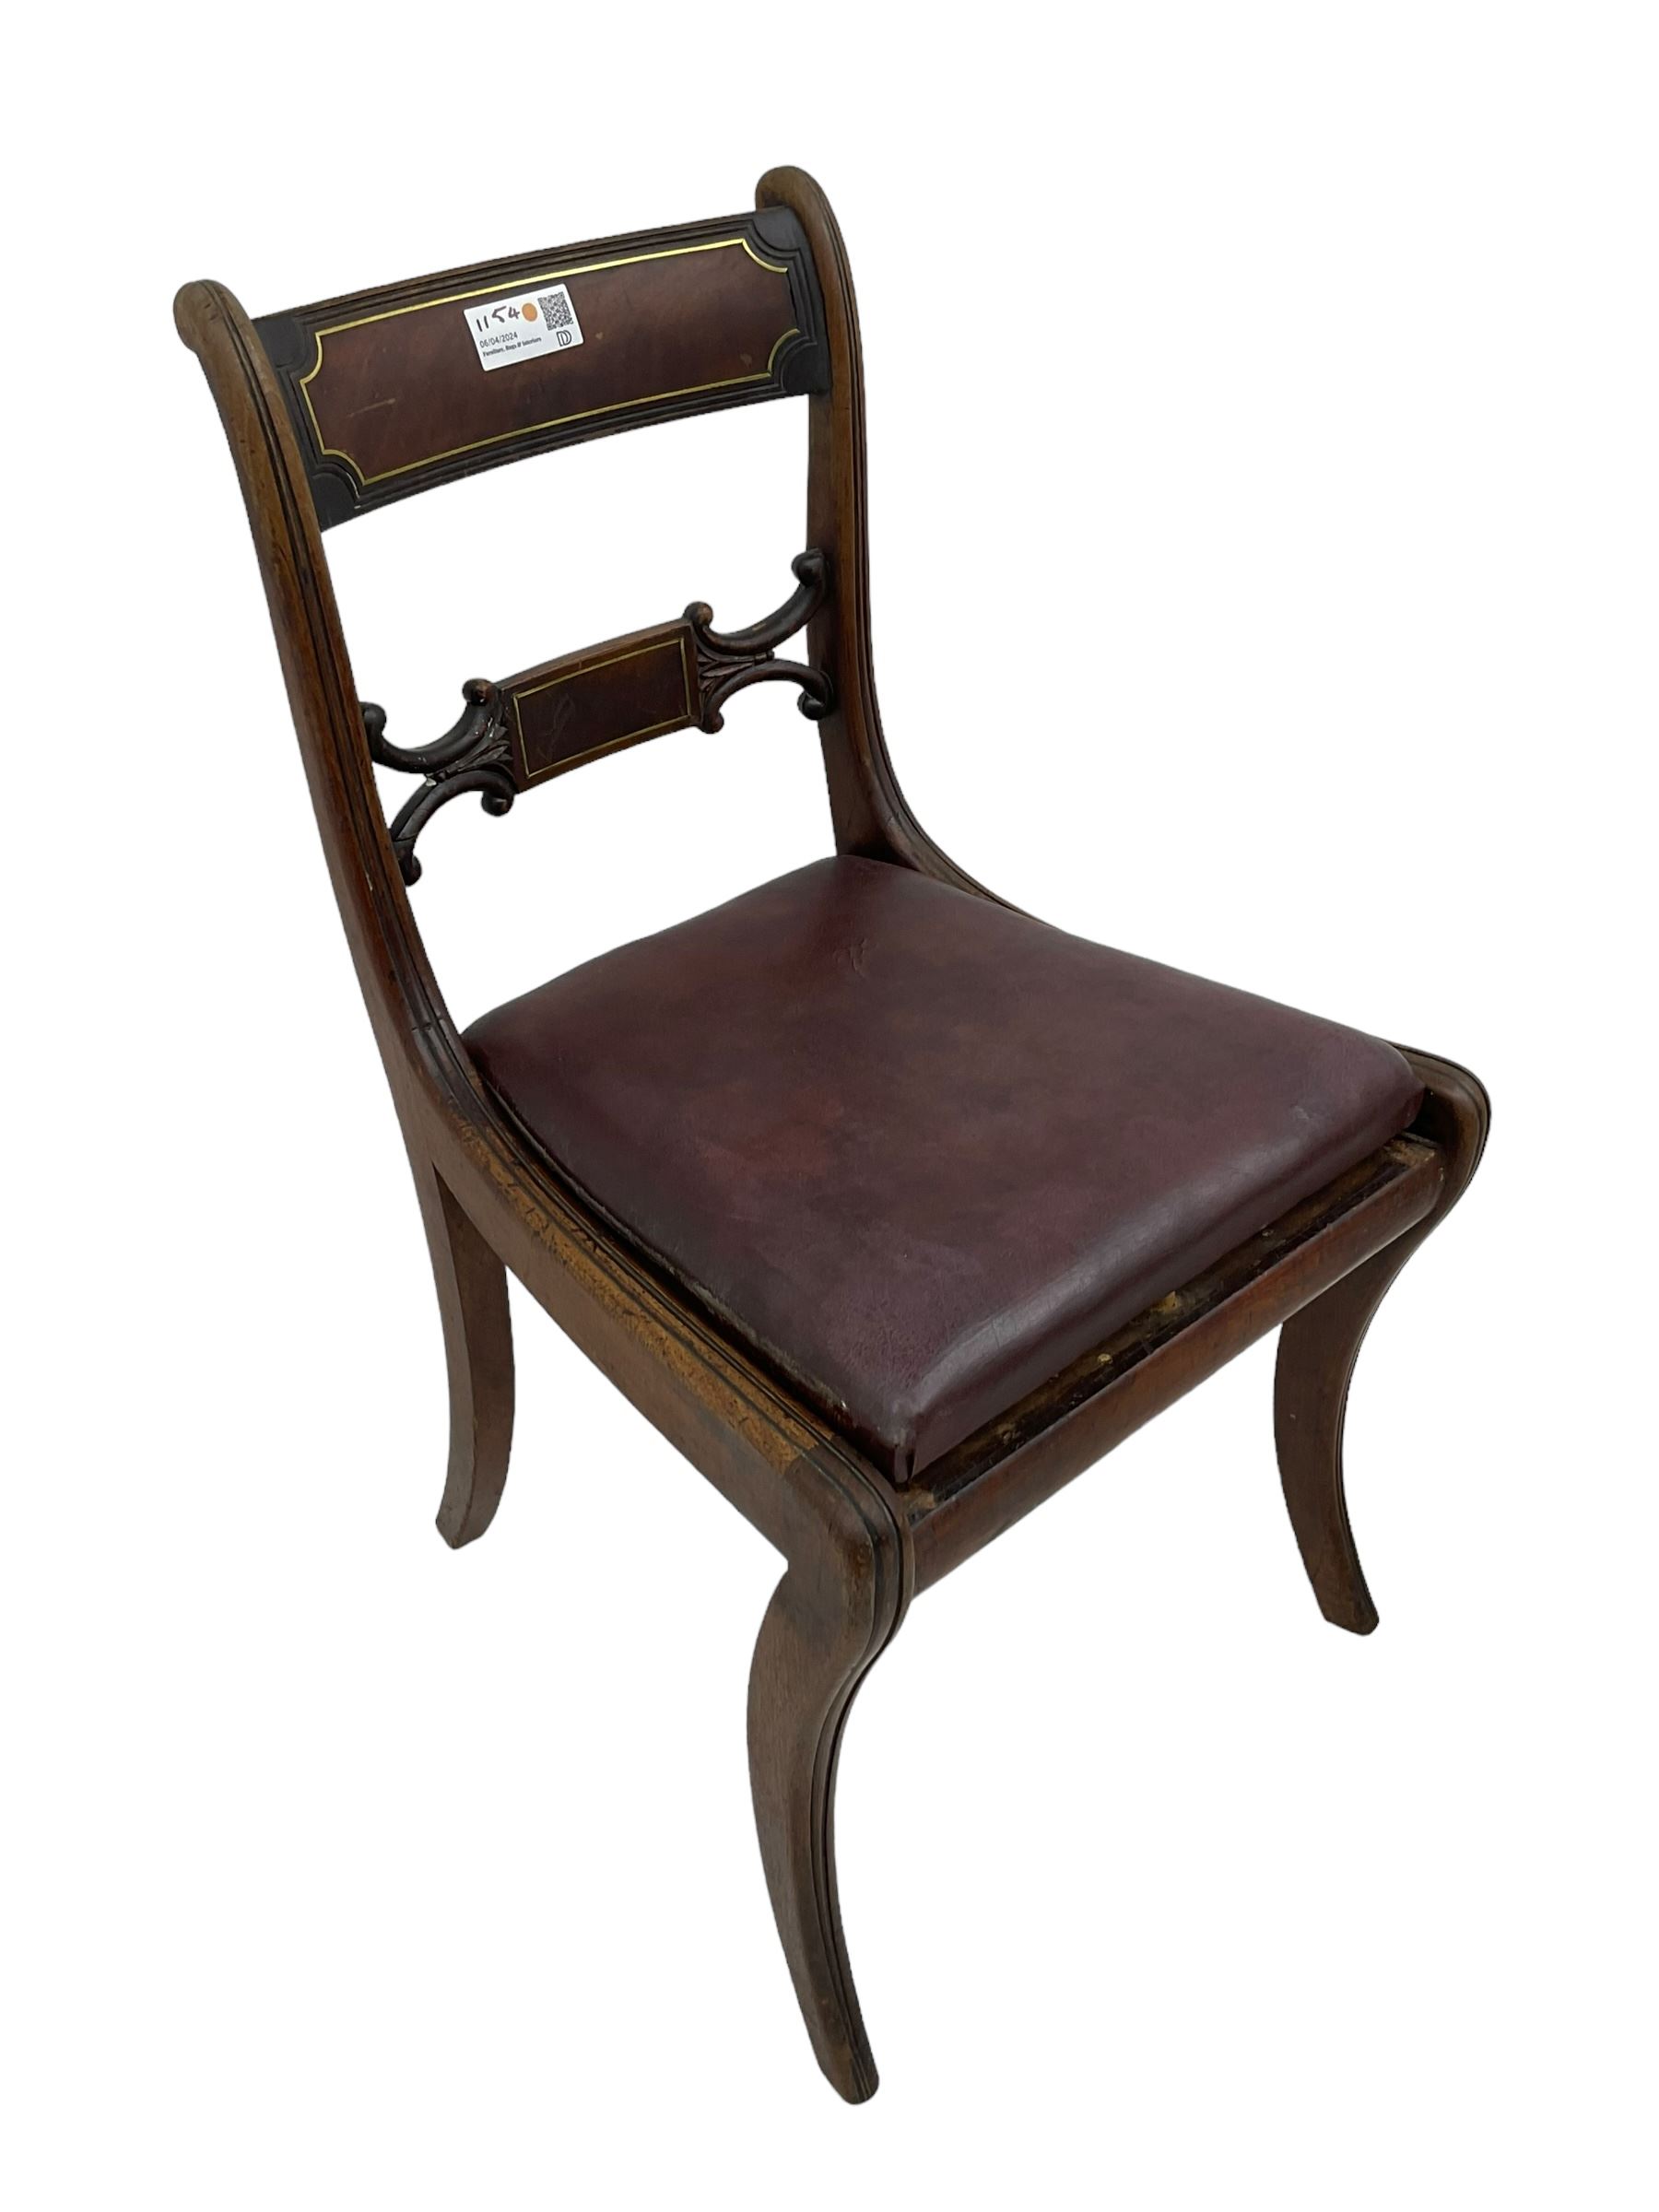 Collection of early 19th century Regency period dining chairs - set of three early 19th century maho - Image 6 of 8